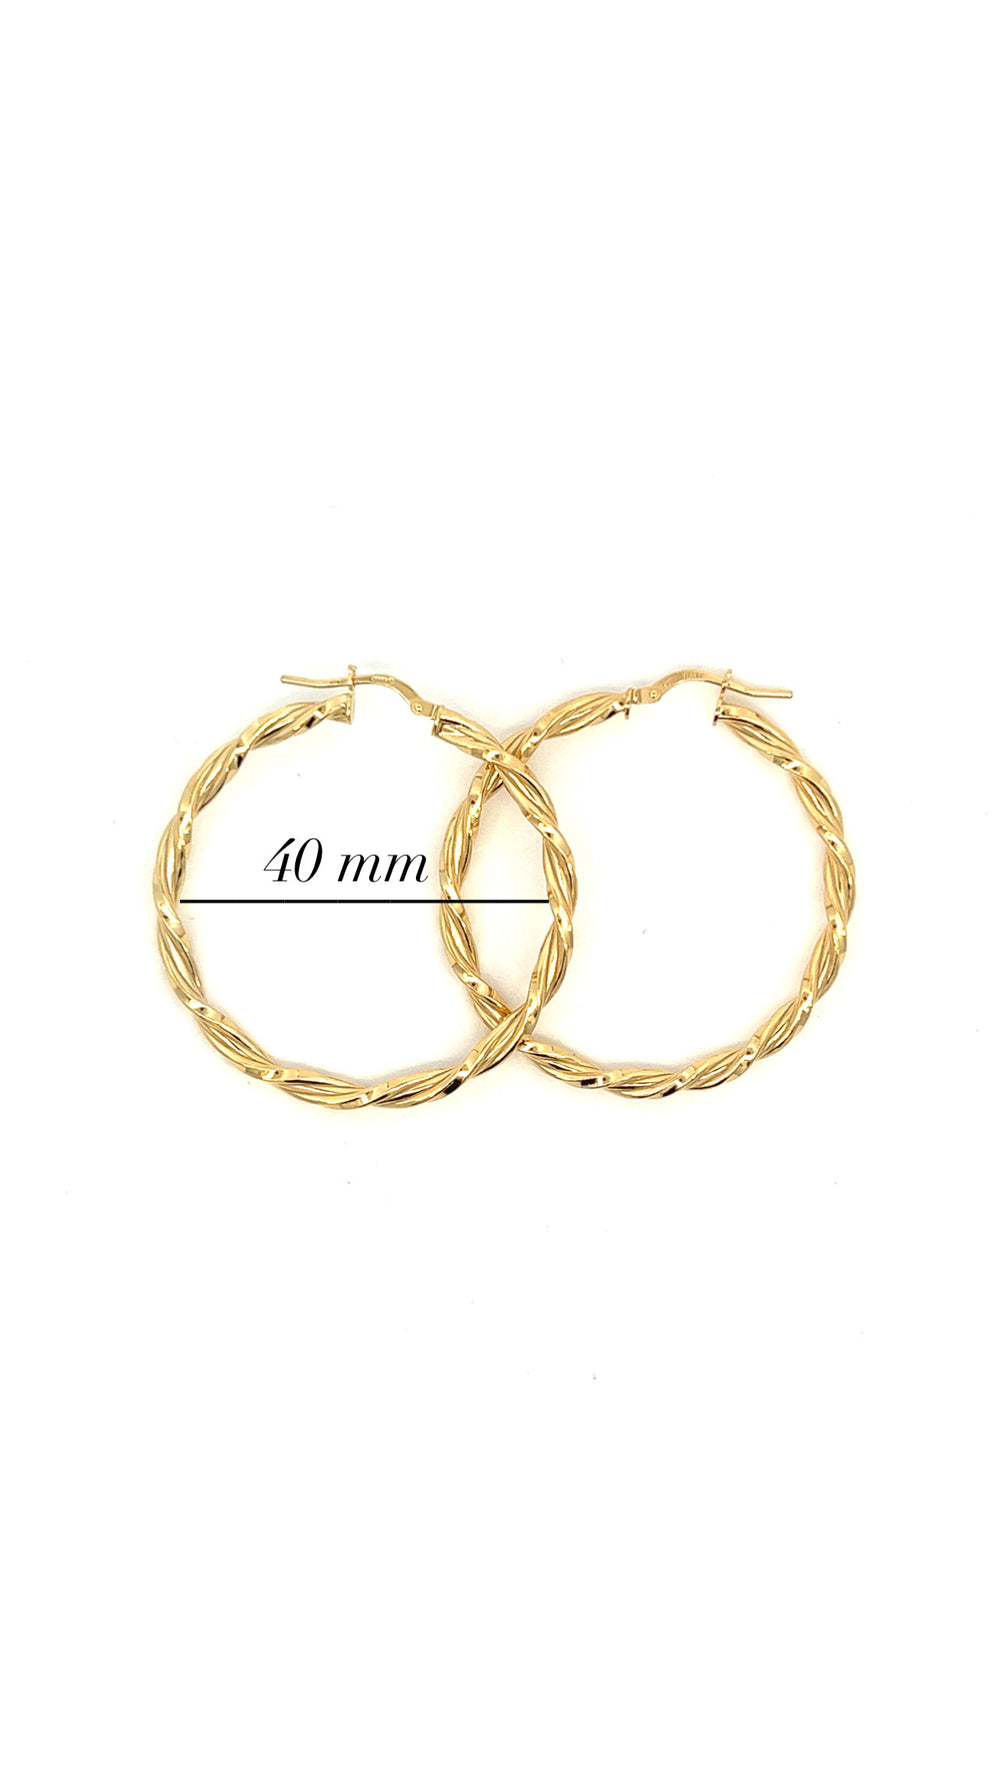 Sterling Silver 2 mm thick, 40 mm Diameter Braided (Woven) Hoop Earring - Gold Plated - Silvadi